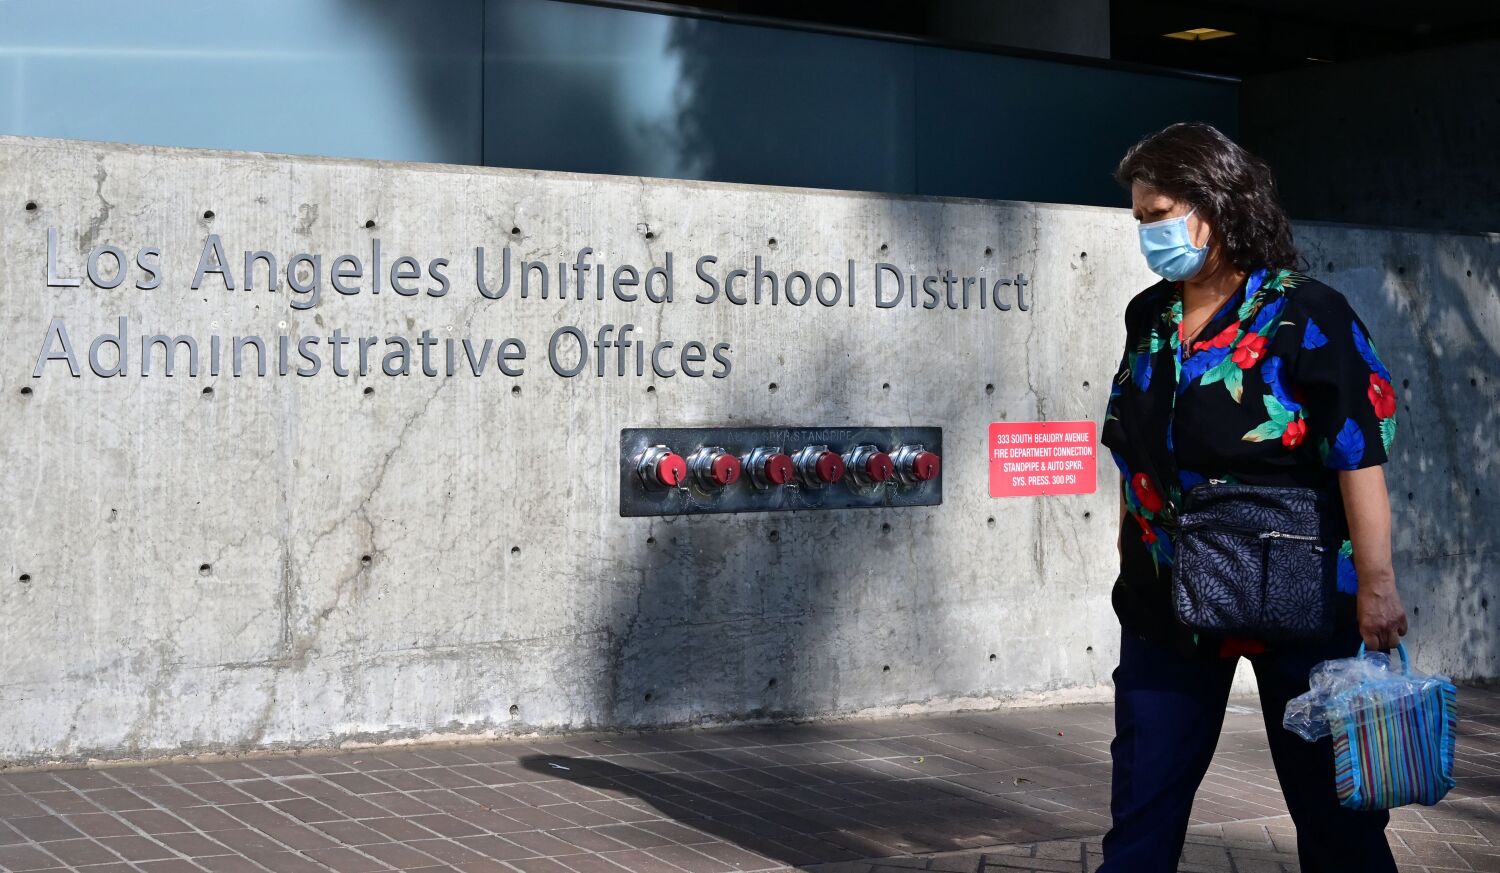 LAUSD agrees to $6.5-million payout to a victim after administrators failed to report sex abuse by a teacher